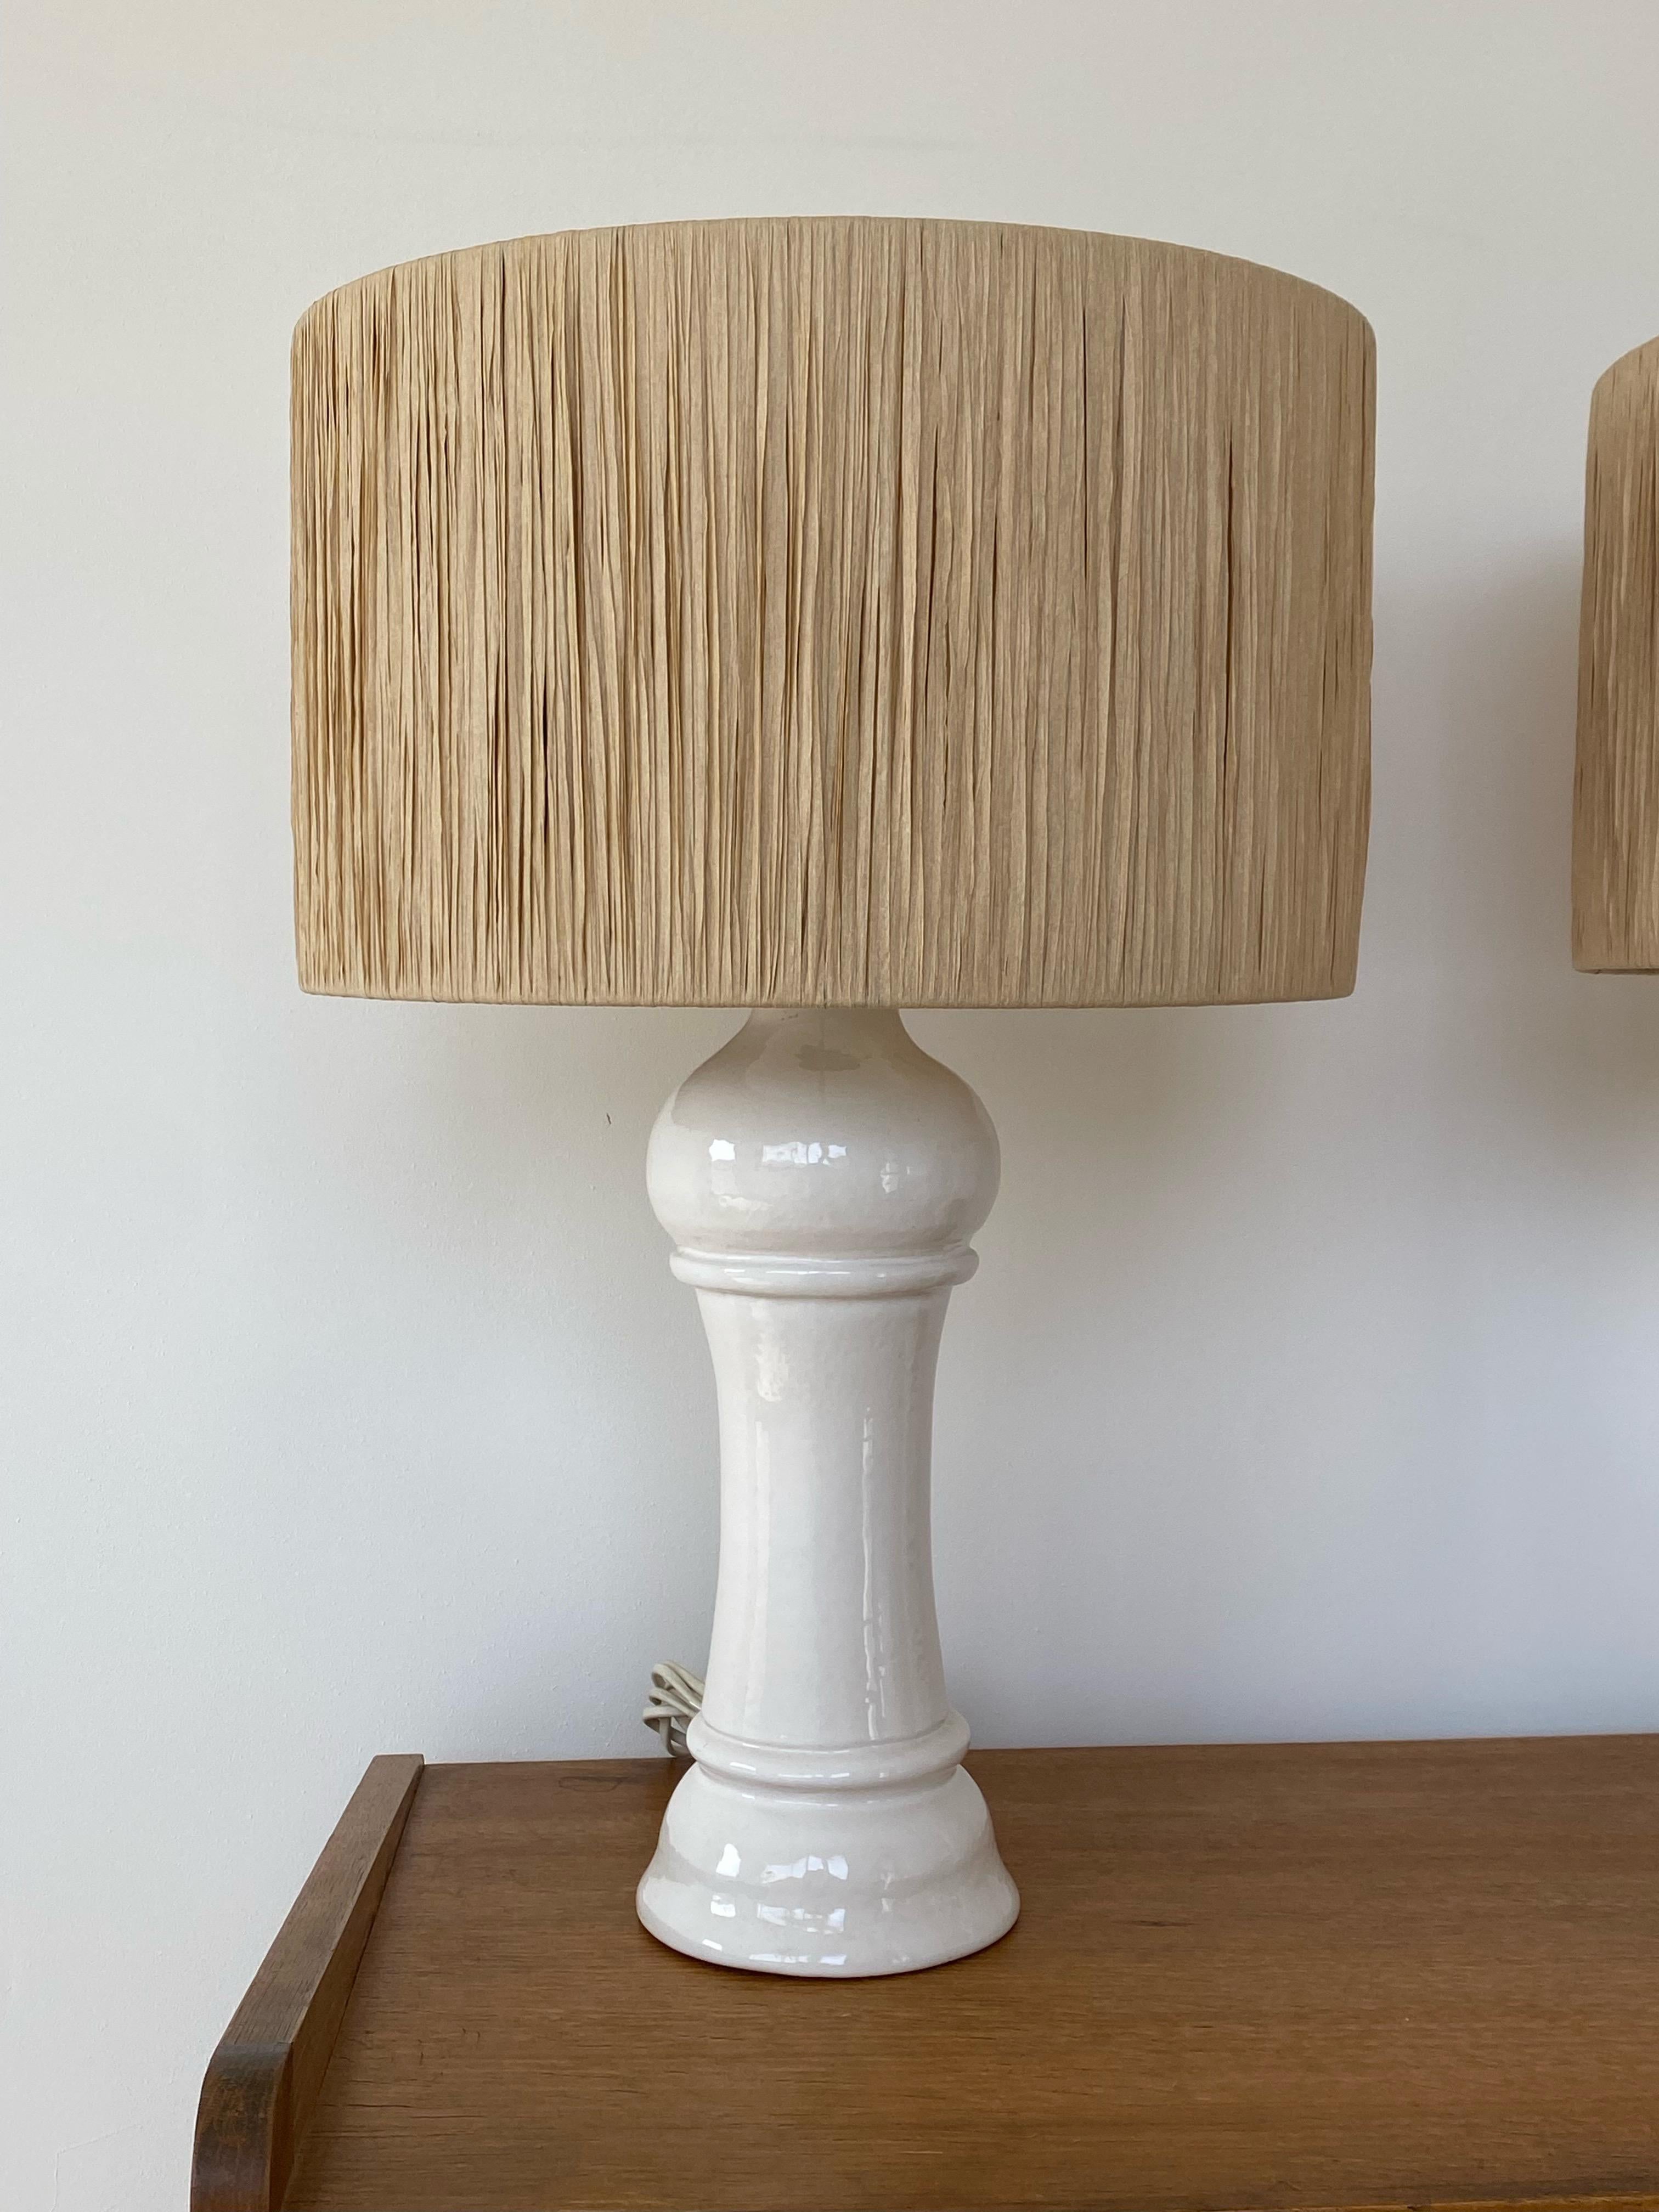 Italian Pair Of White Ceramic Lamps With Raffia Shade, Italy, 1960s For Sale